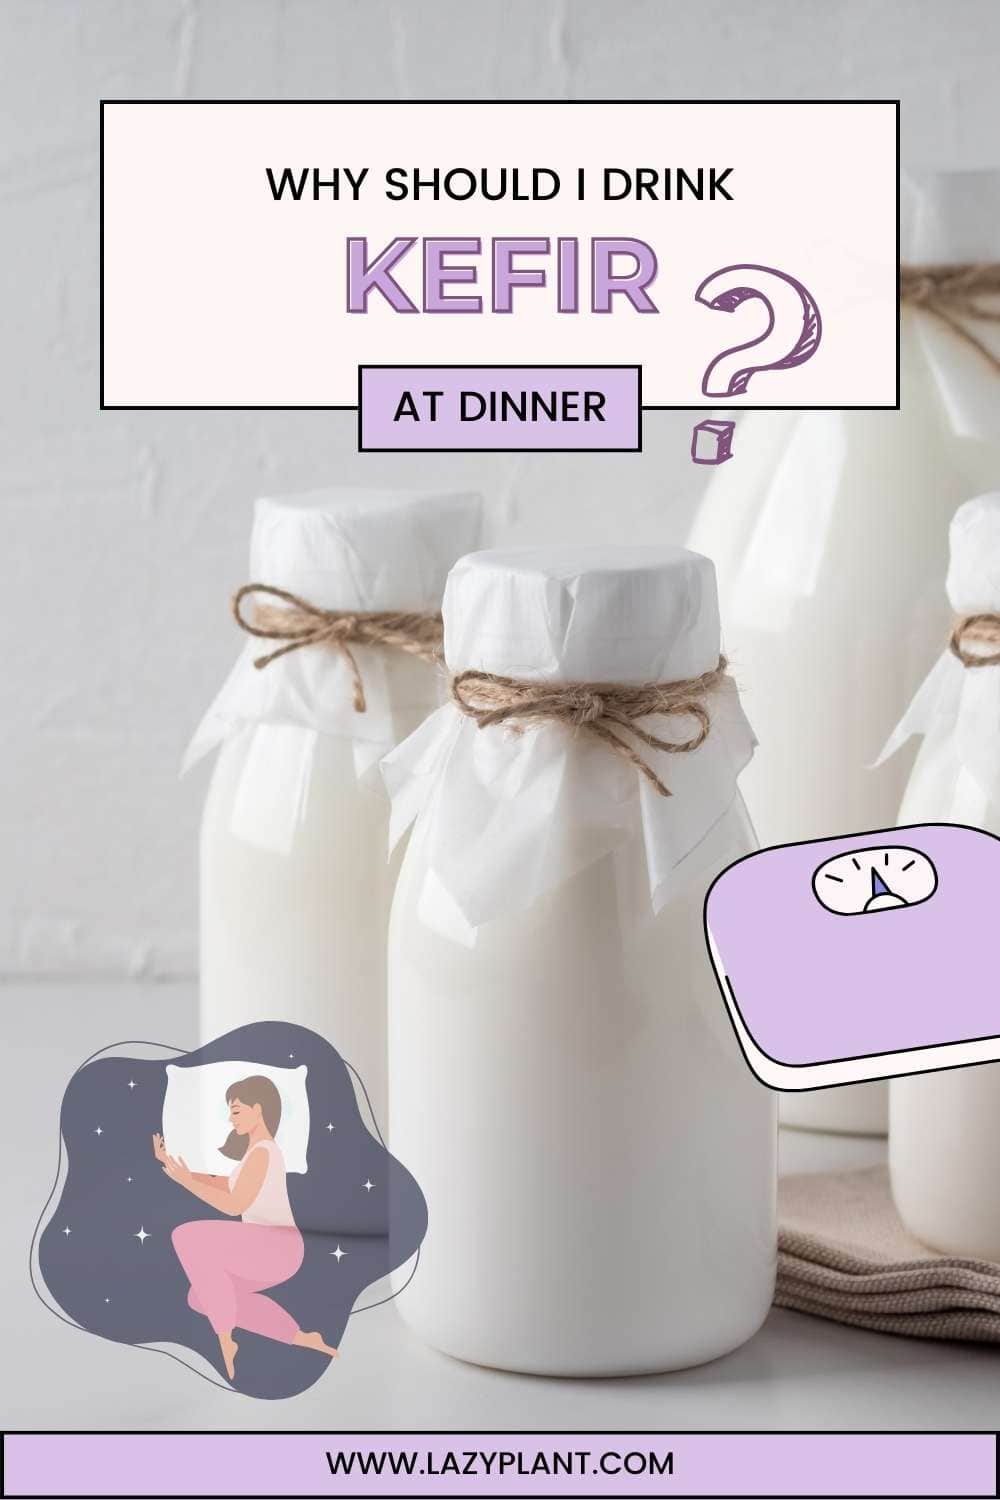 Why should I drink kefir before bed for a good night’s sleep?